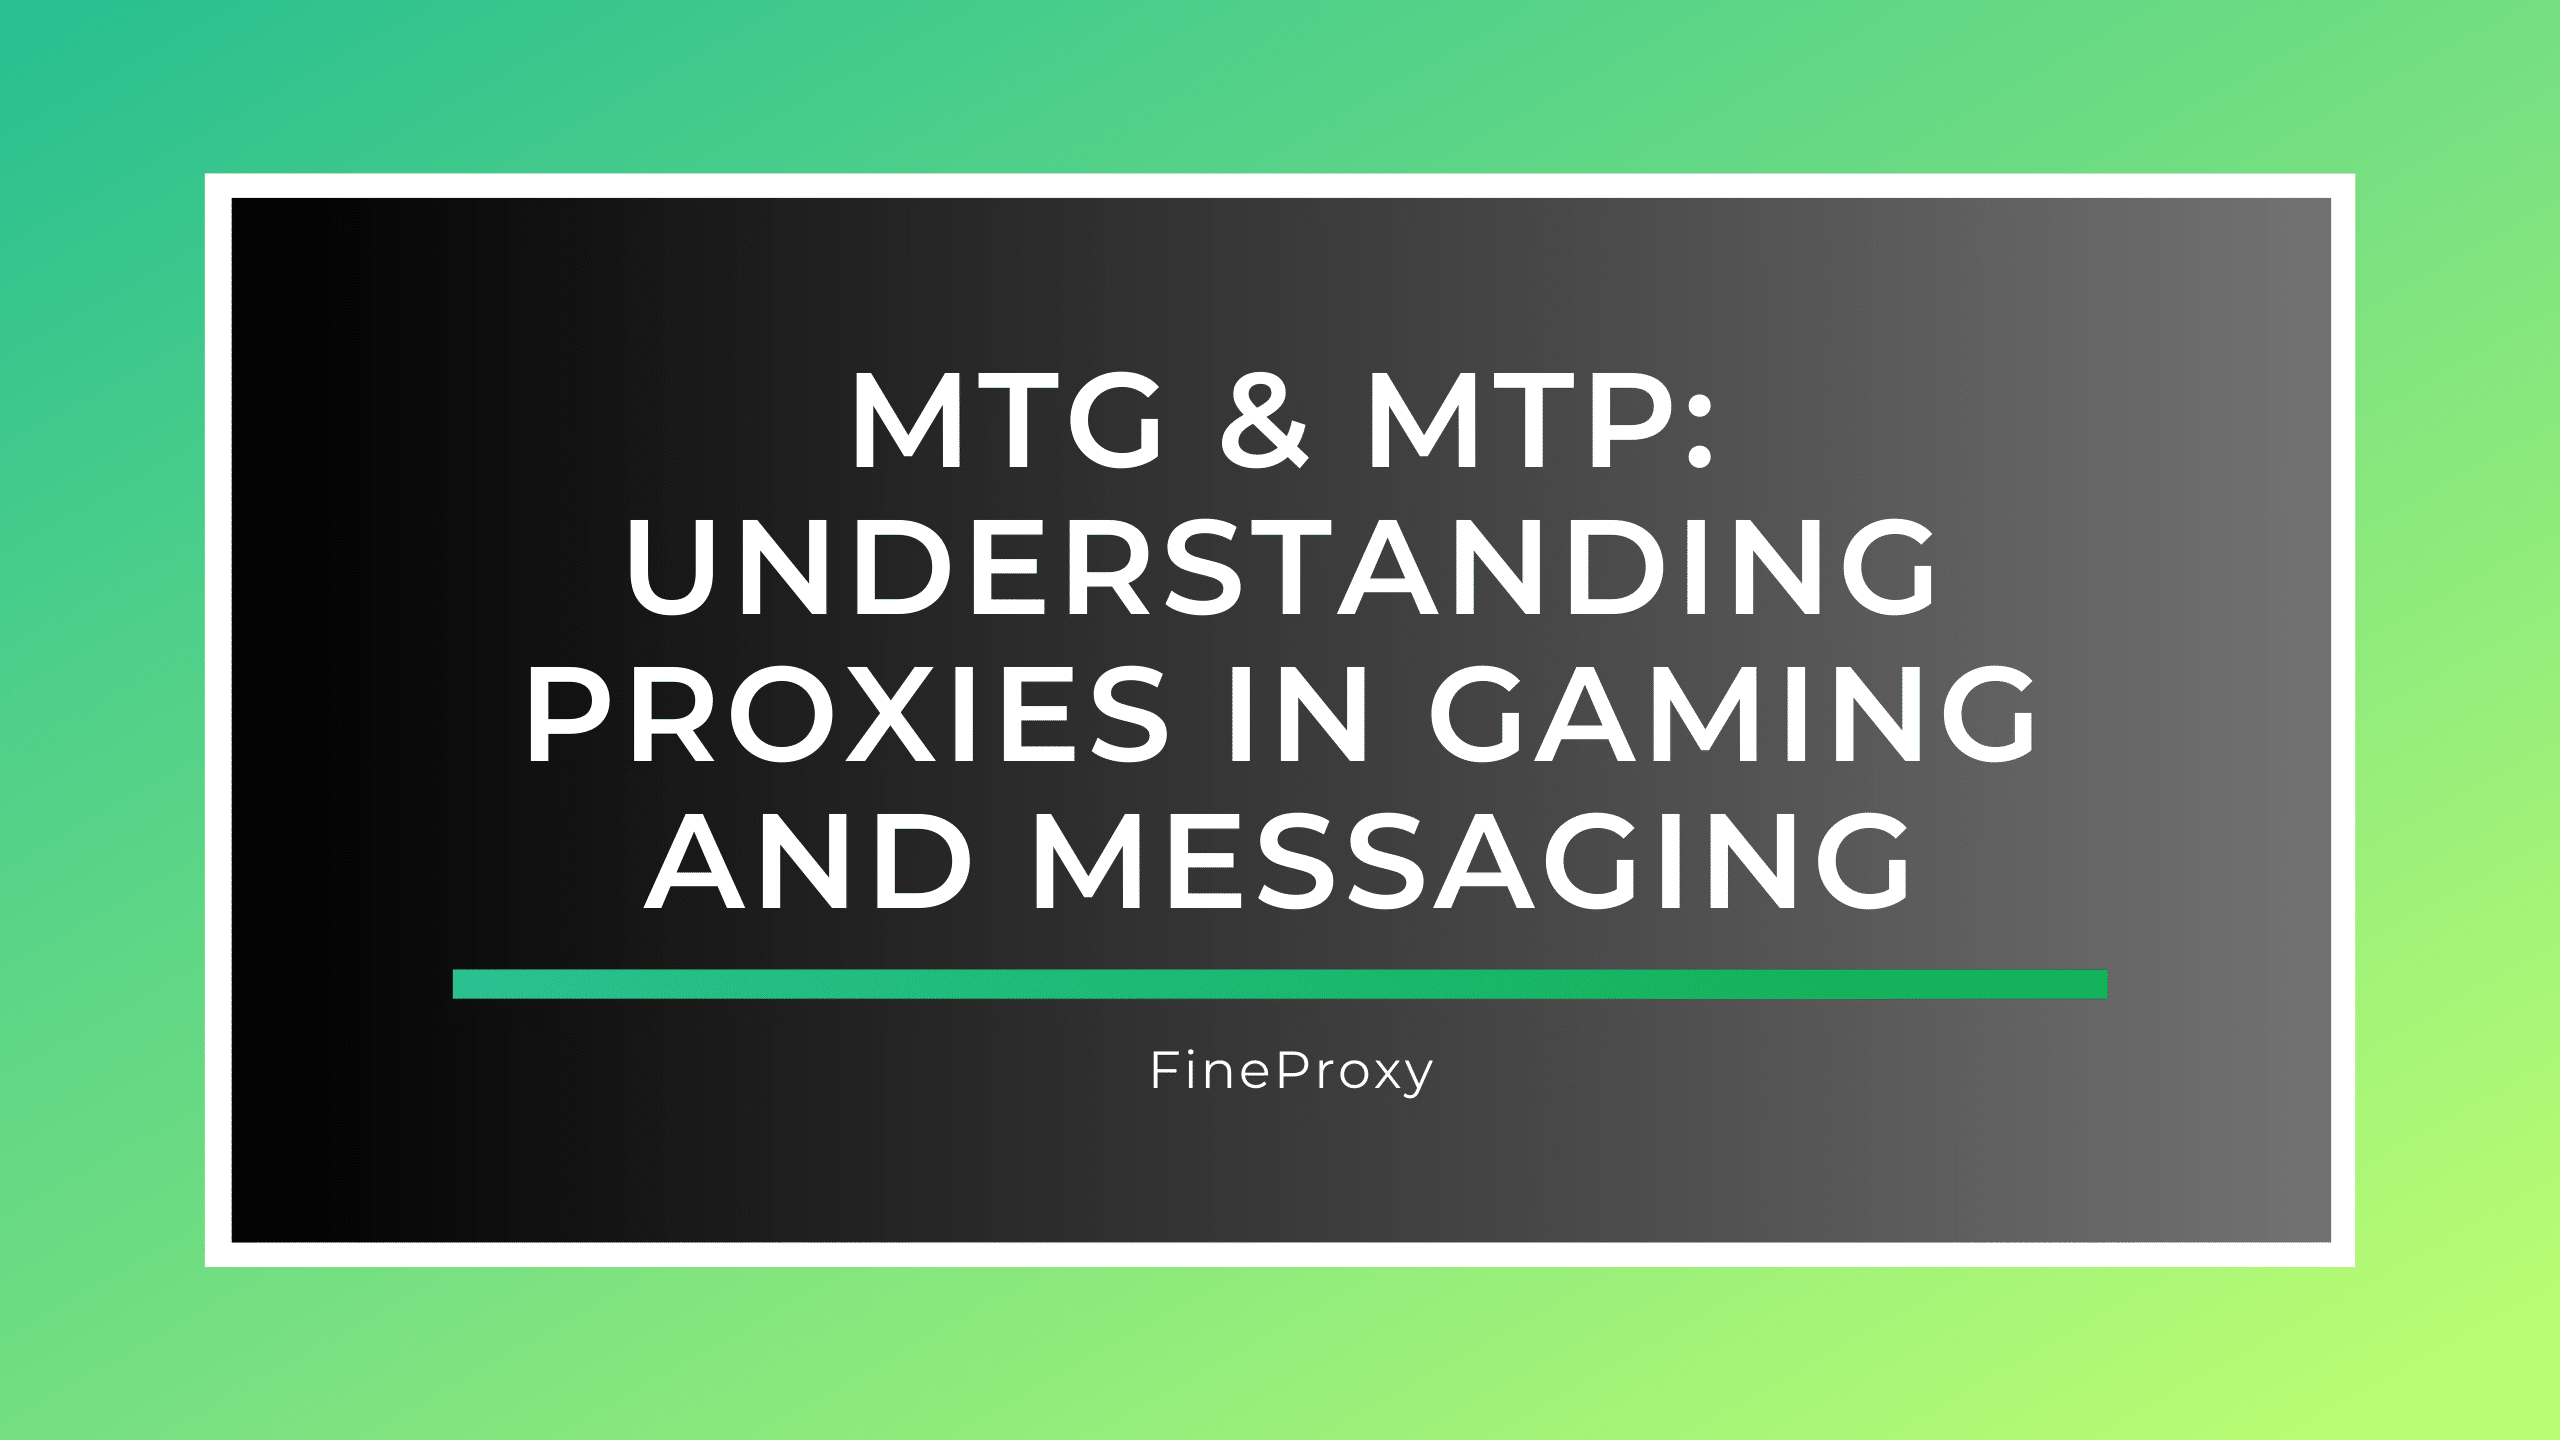 MTG & MTP: Understanding Proxies in Gaming and Messaging